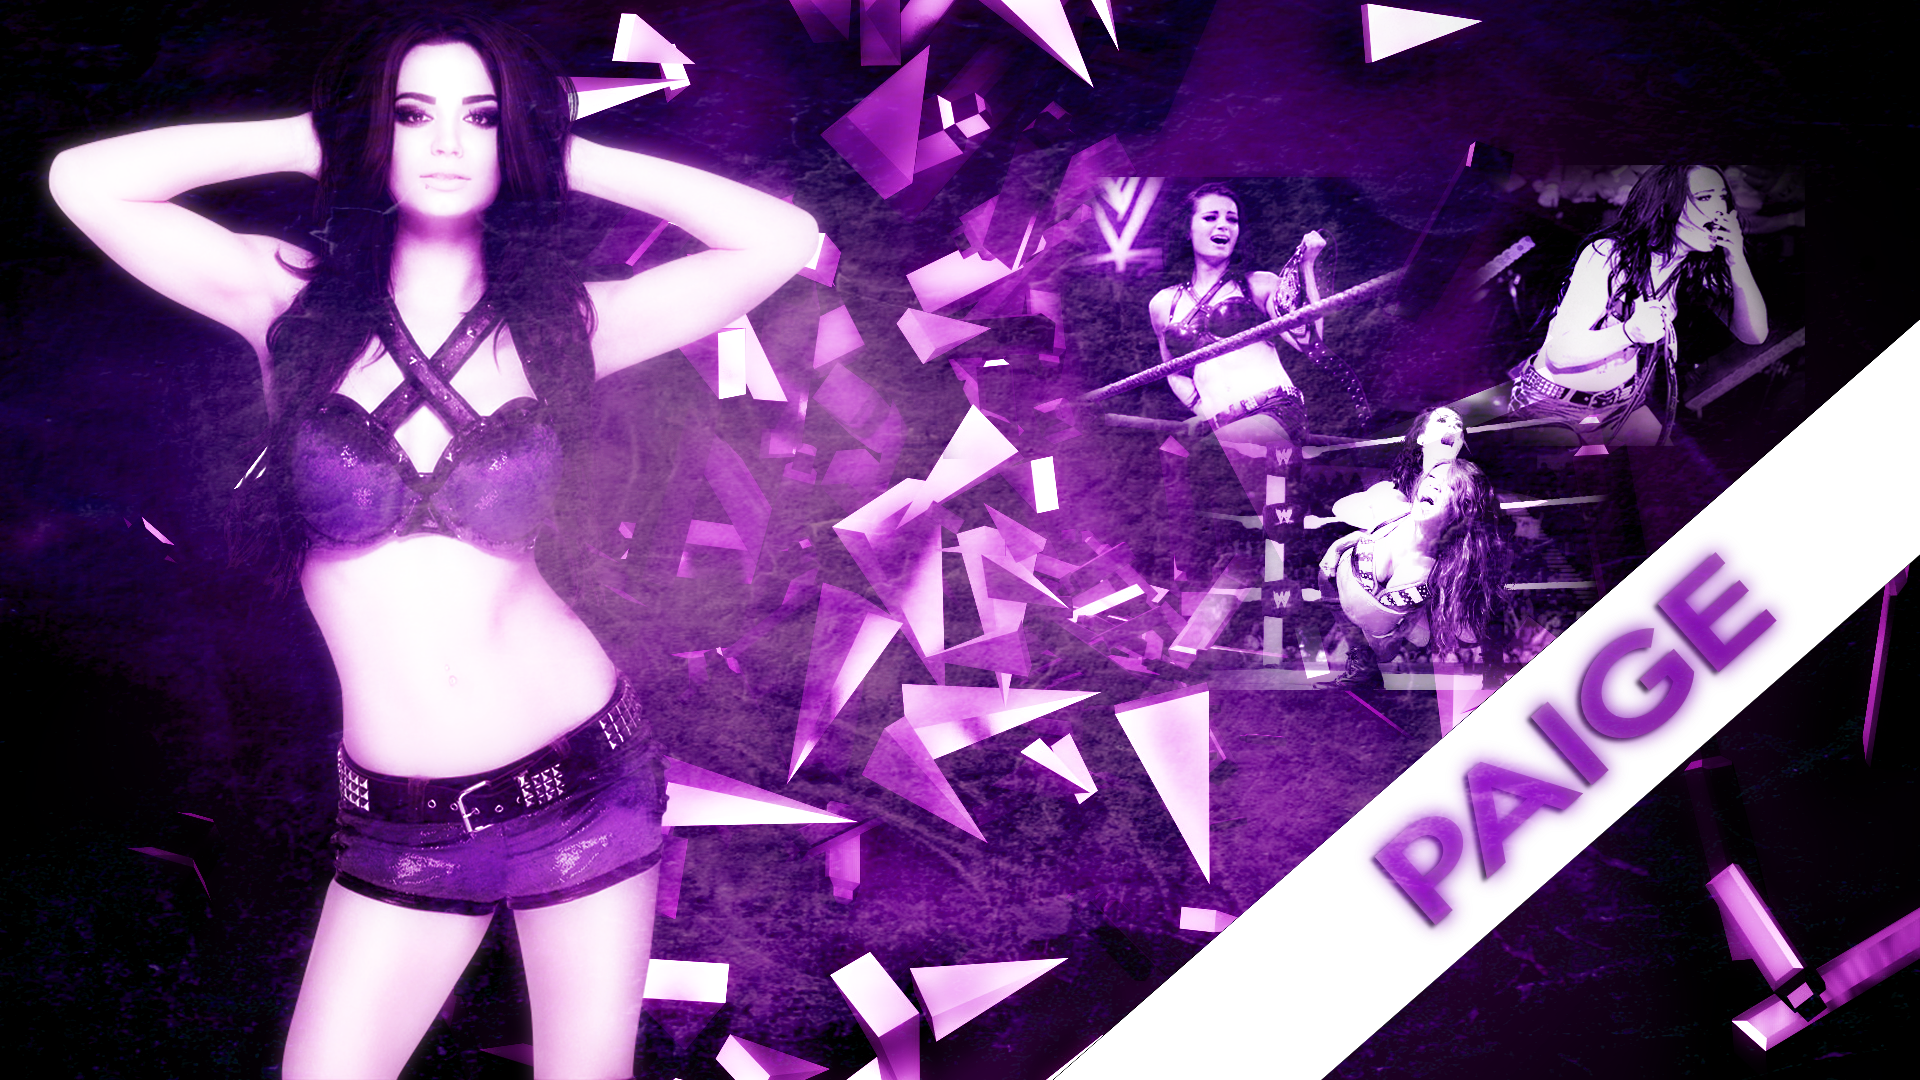 WWE Diva Paige Retro Colors Wallpapers